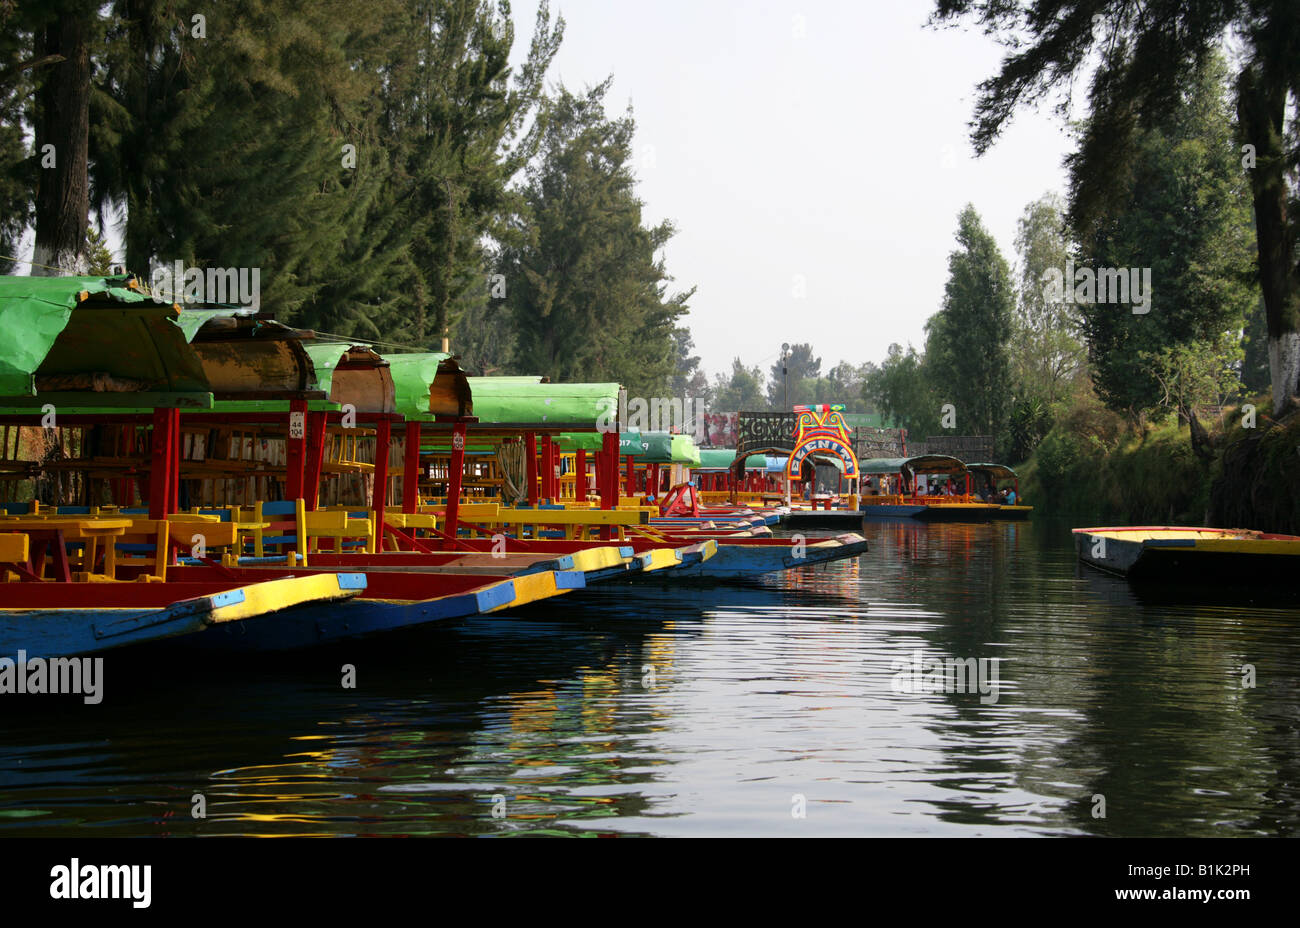 Colourful Trajinera Boats on the Canals of the Floating Gardens of Xochimilco Mexico City Stock Photo